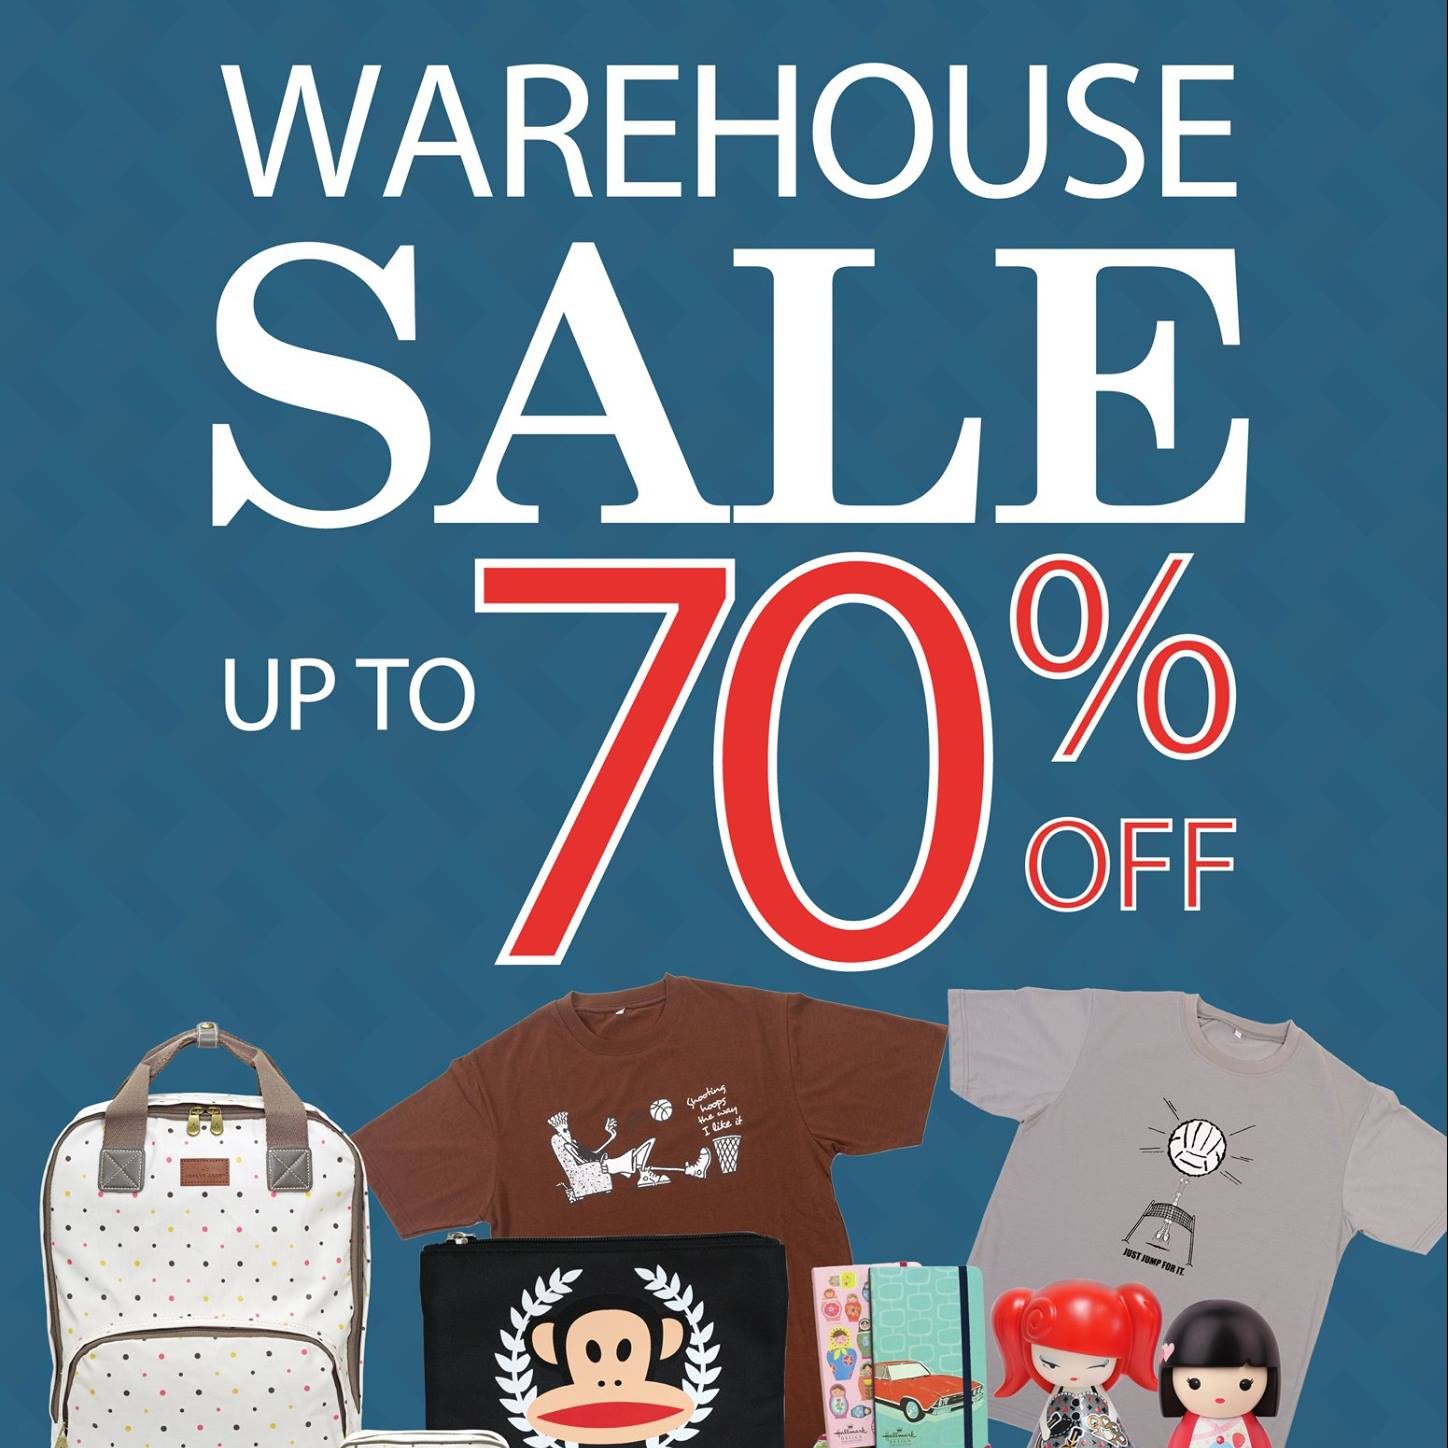 Precious Thots Singapore Warehouse Sale Up to 70% Off Promotion While Stocks Last